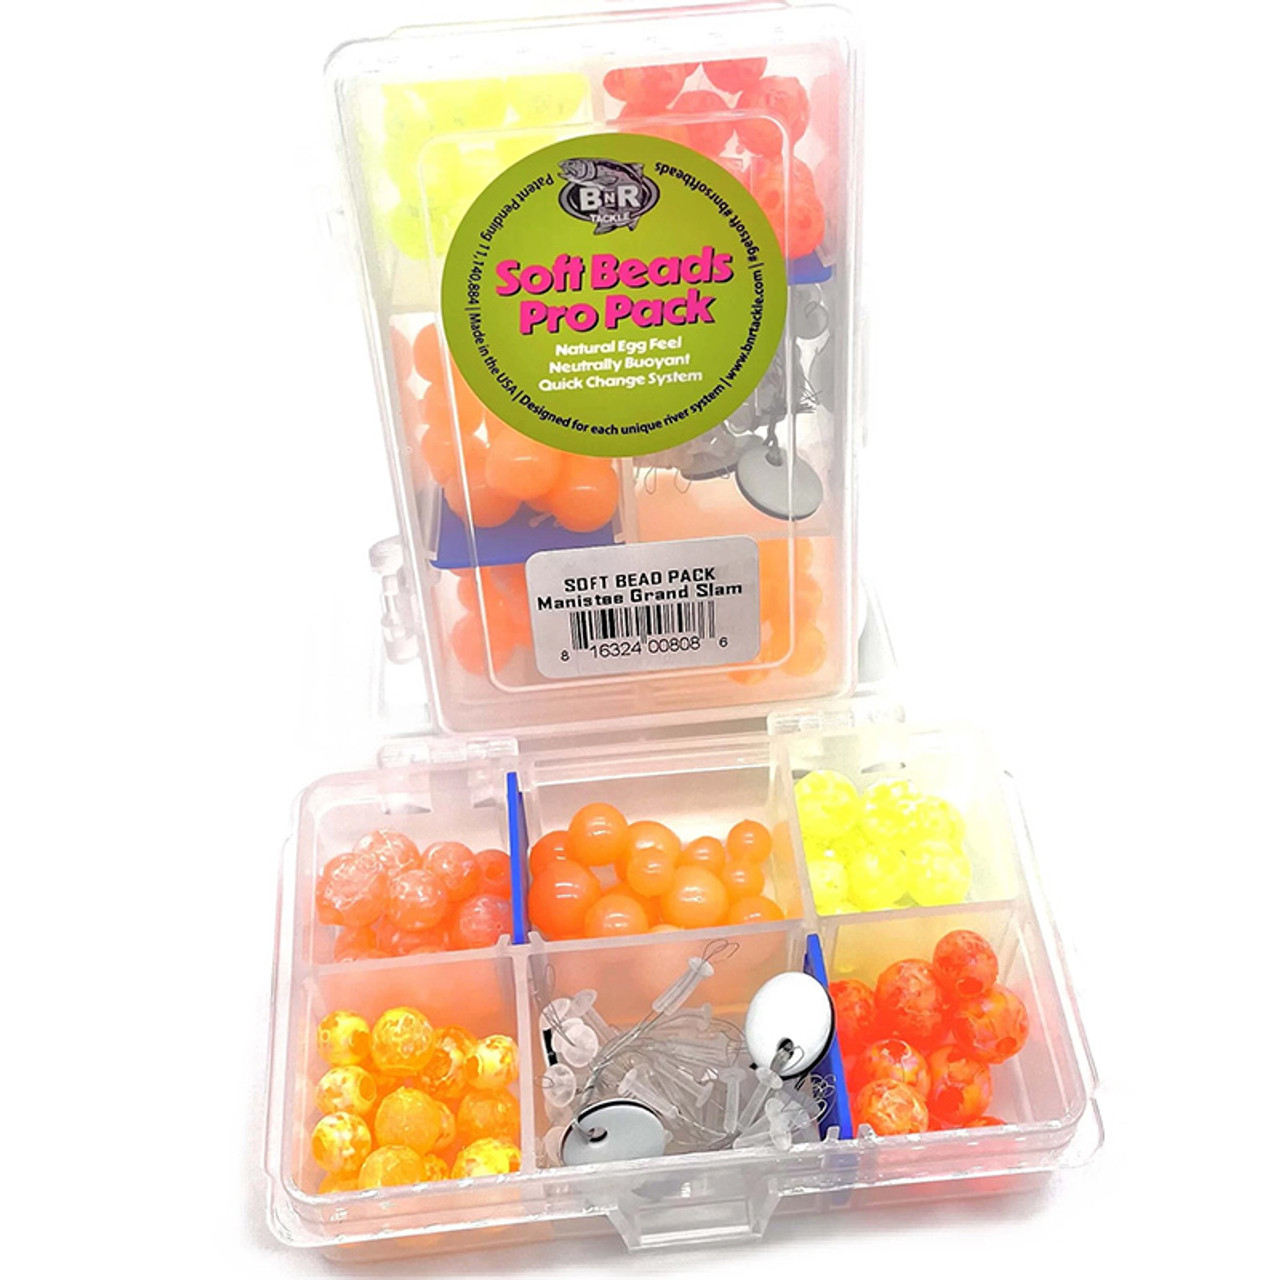 BnR Tackle Manistee Grand Slam Soft Beads Pro Pack